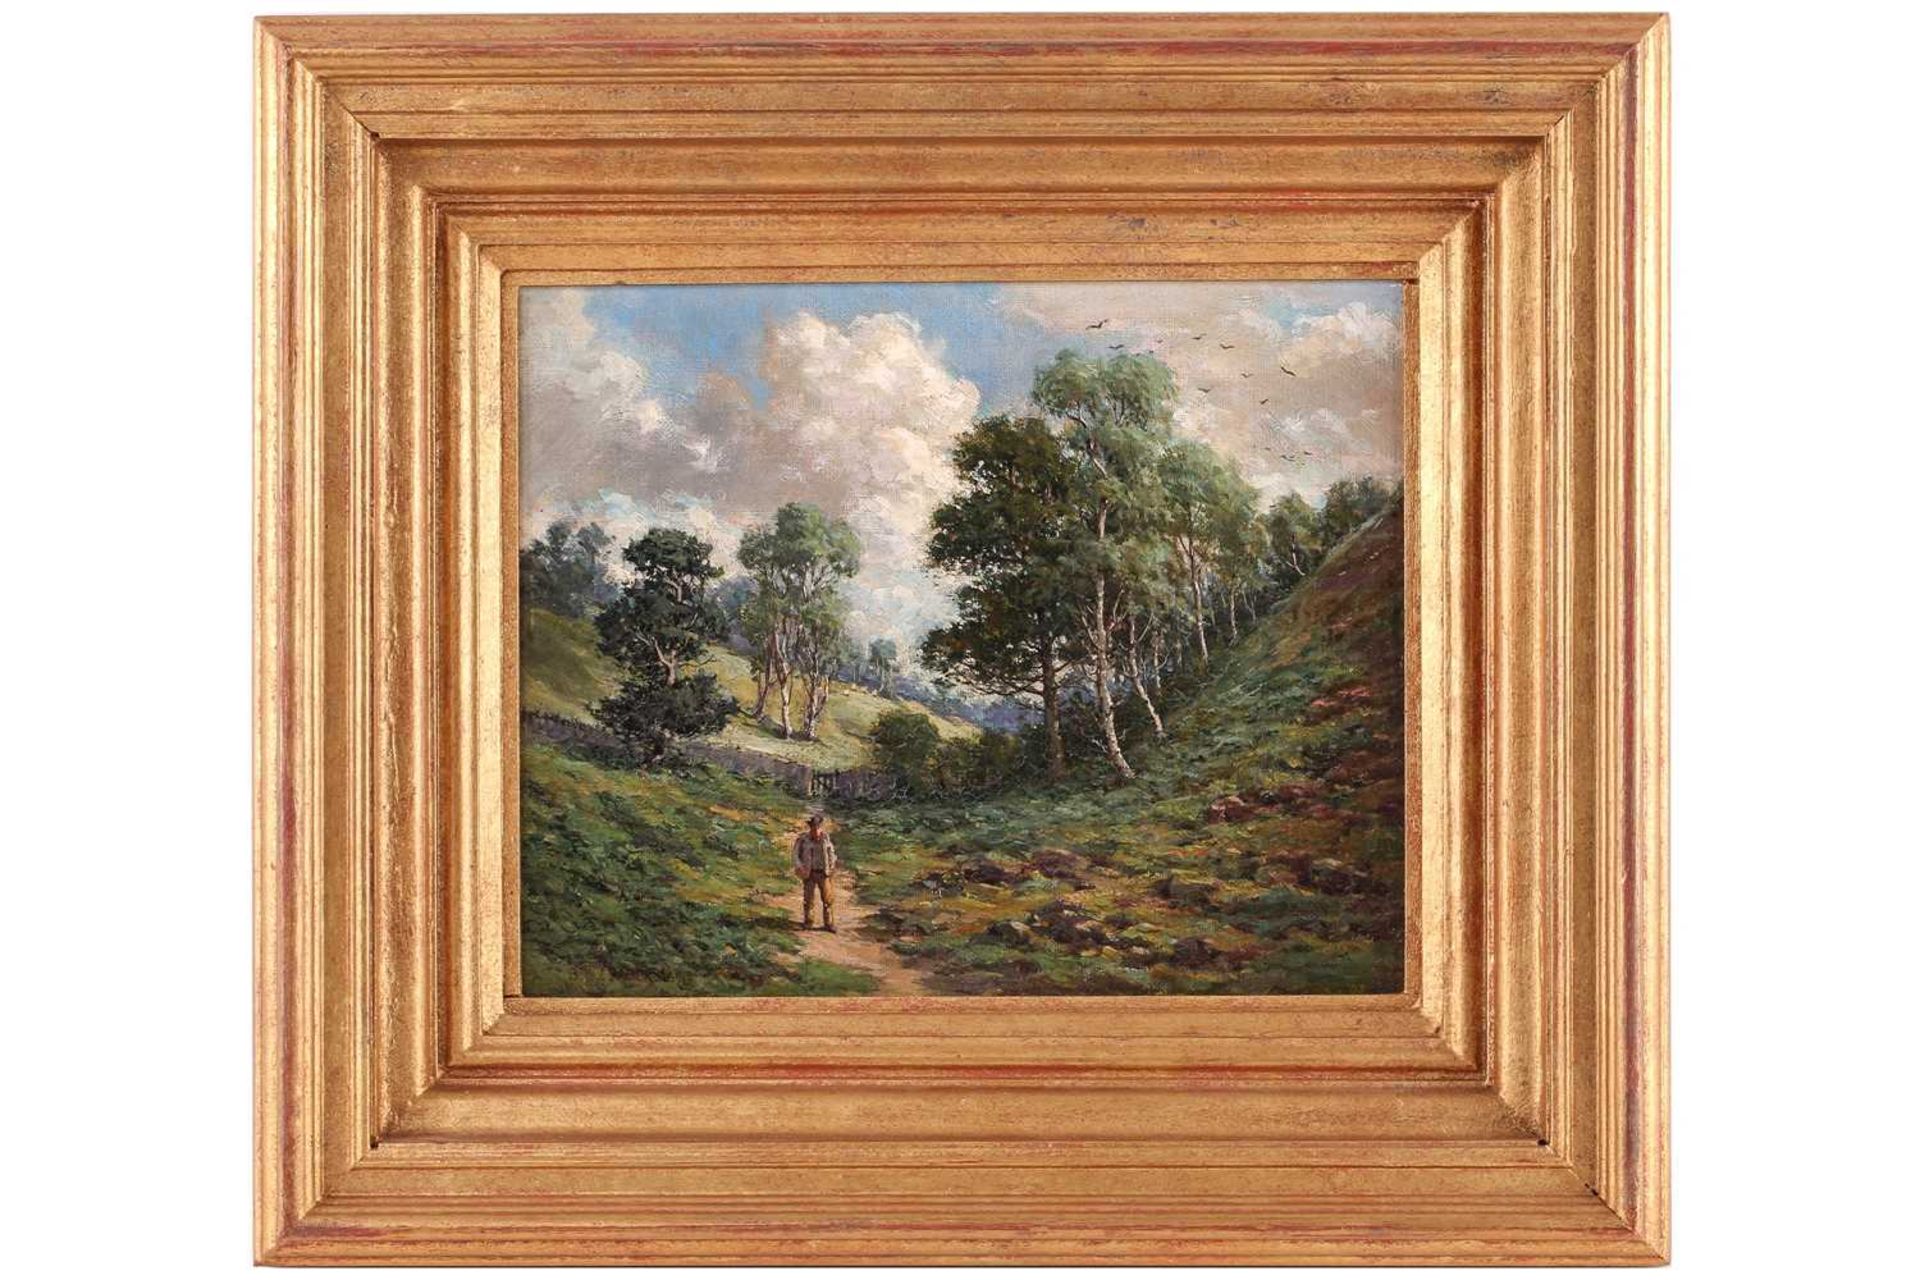 B.W.L. Sader? (19th century), Man walking along a rural track, signed indistinctly, dated 1890,